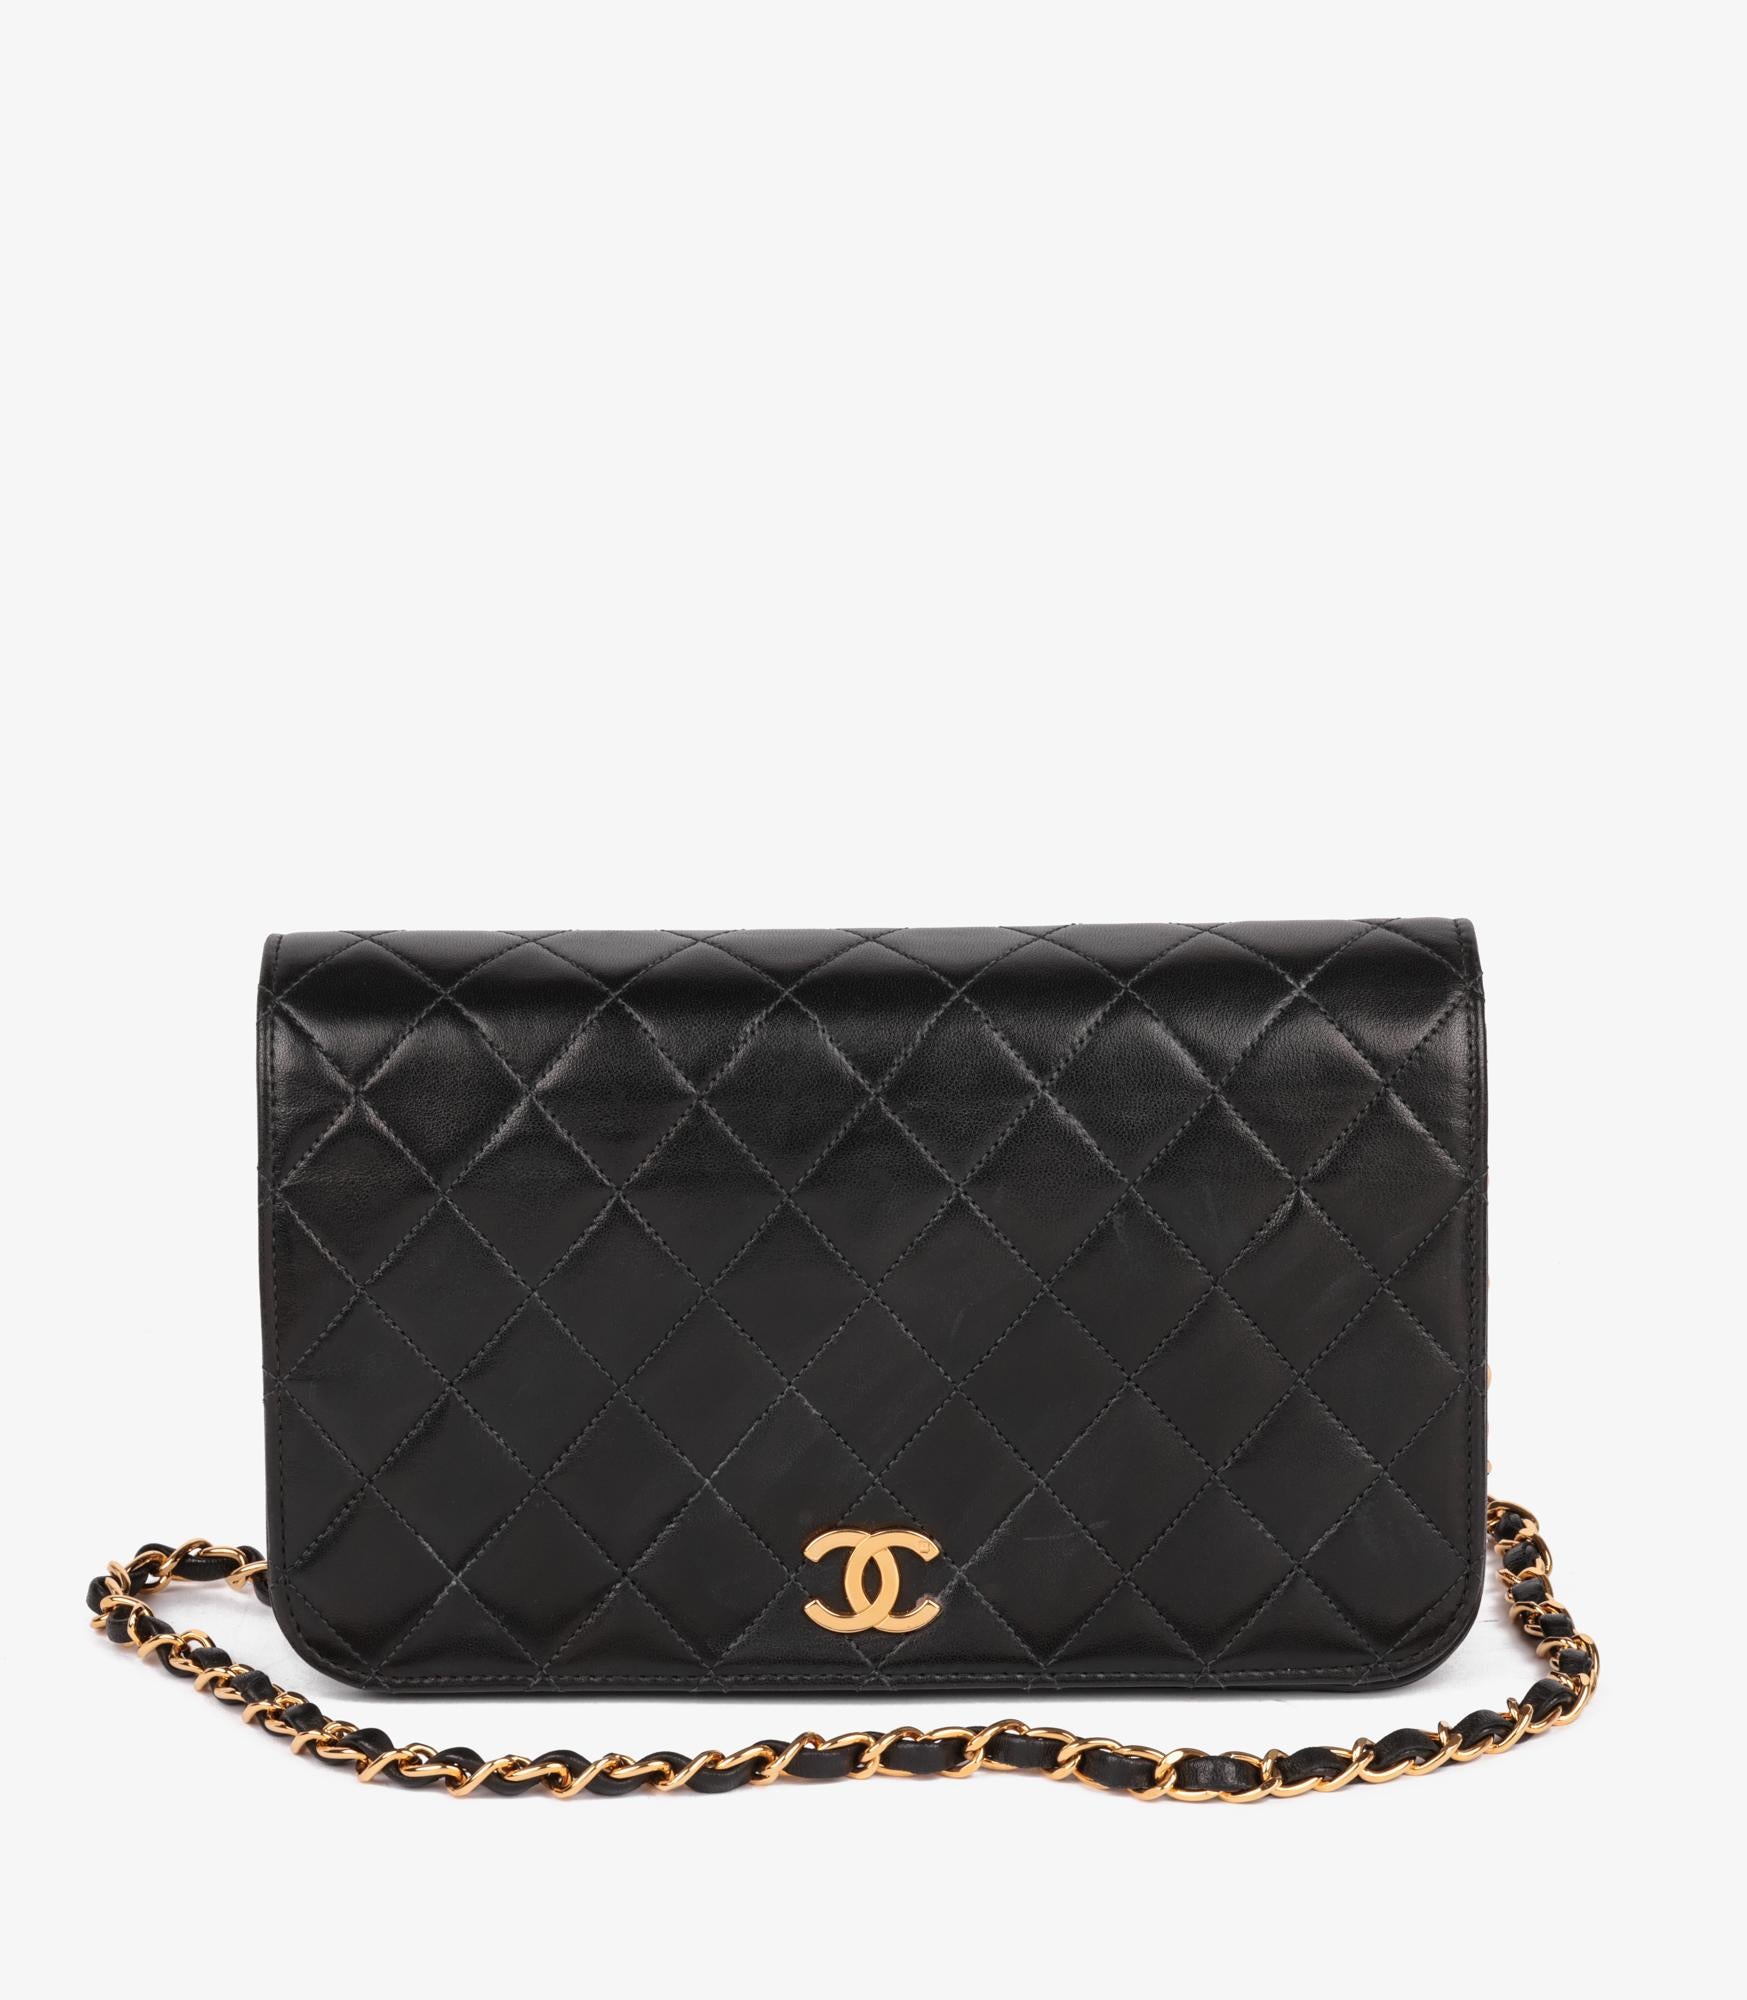 Chanel Black Quilted Lambskin Vintage Small Classic Single Full Flap Bag

Brand- Chanel
Model- Small Classic Single Full Flap Bag
Product Type- Shoulder
Serial Number- 5117101
Age- Circa 1997
Accompanied By- Chanel Dust Bag, Authenticity